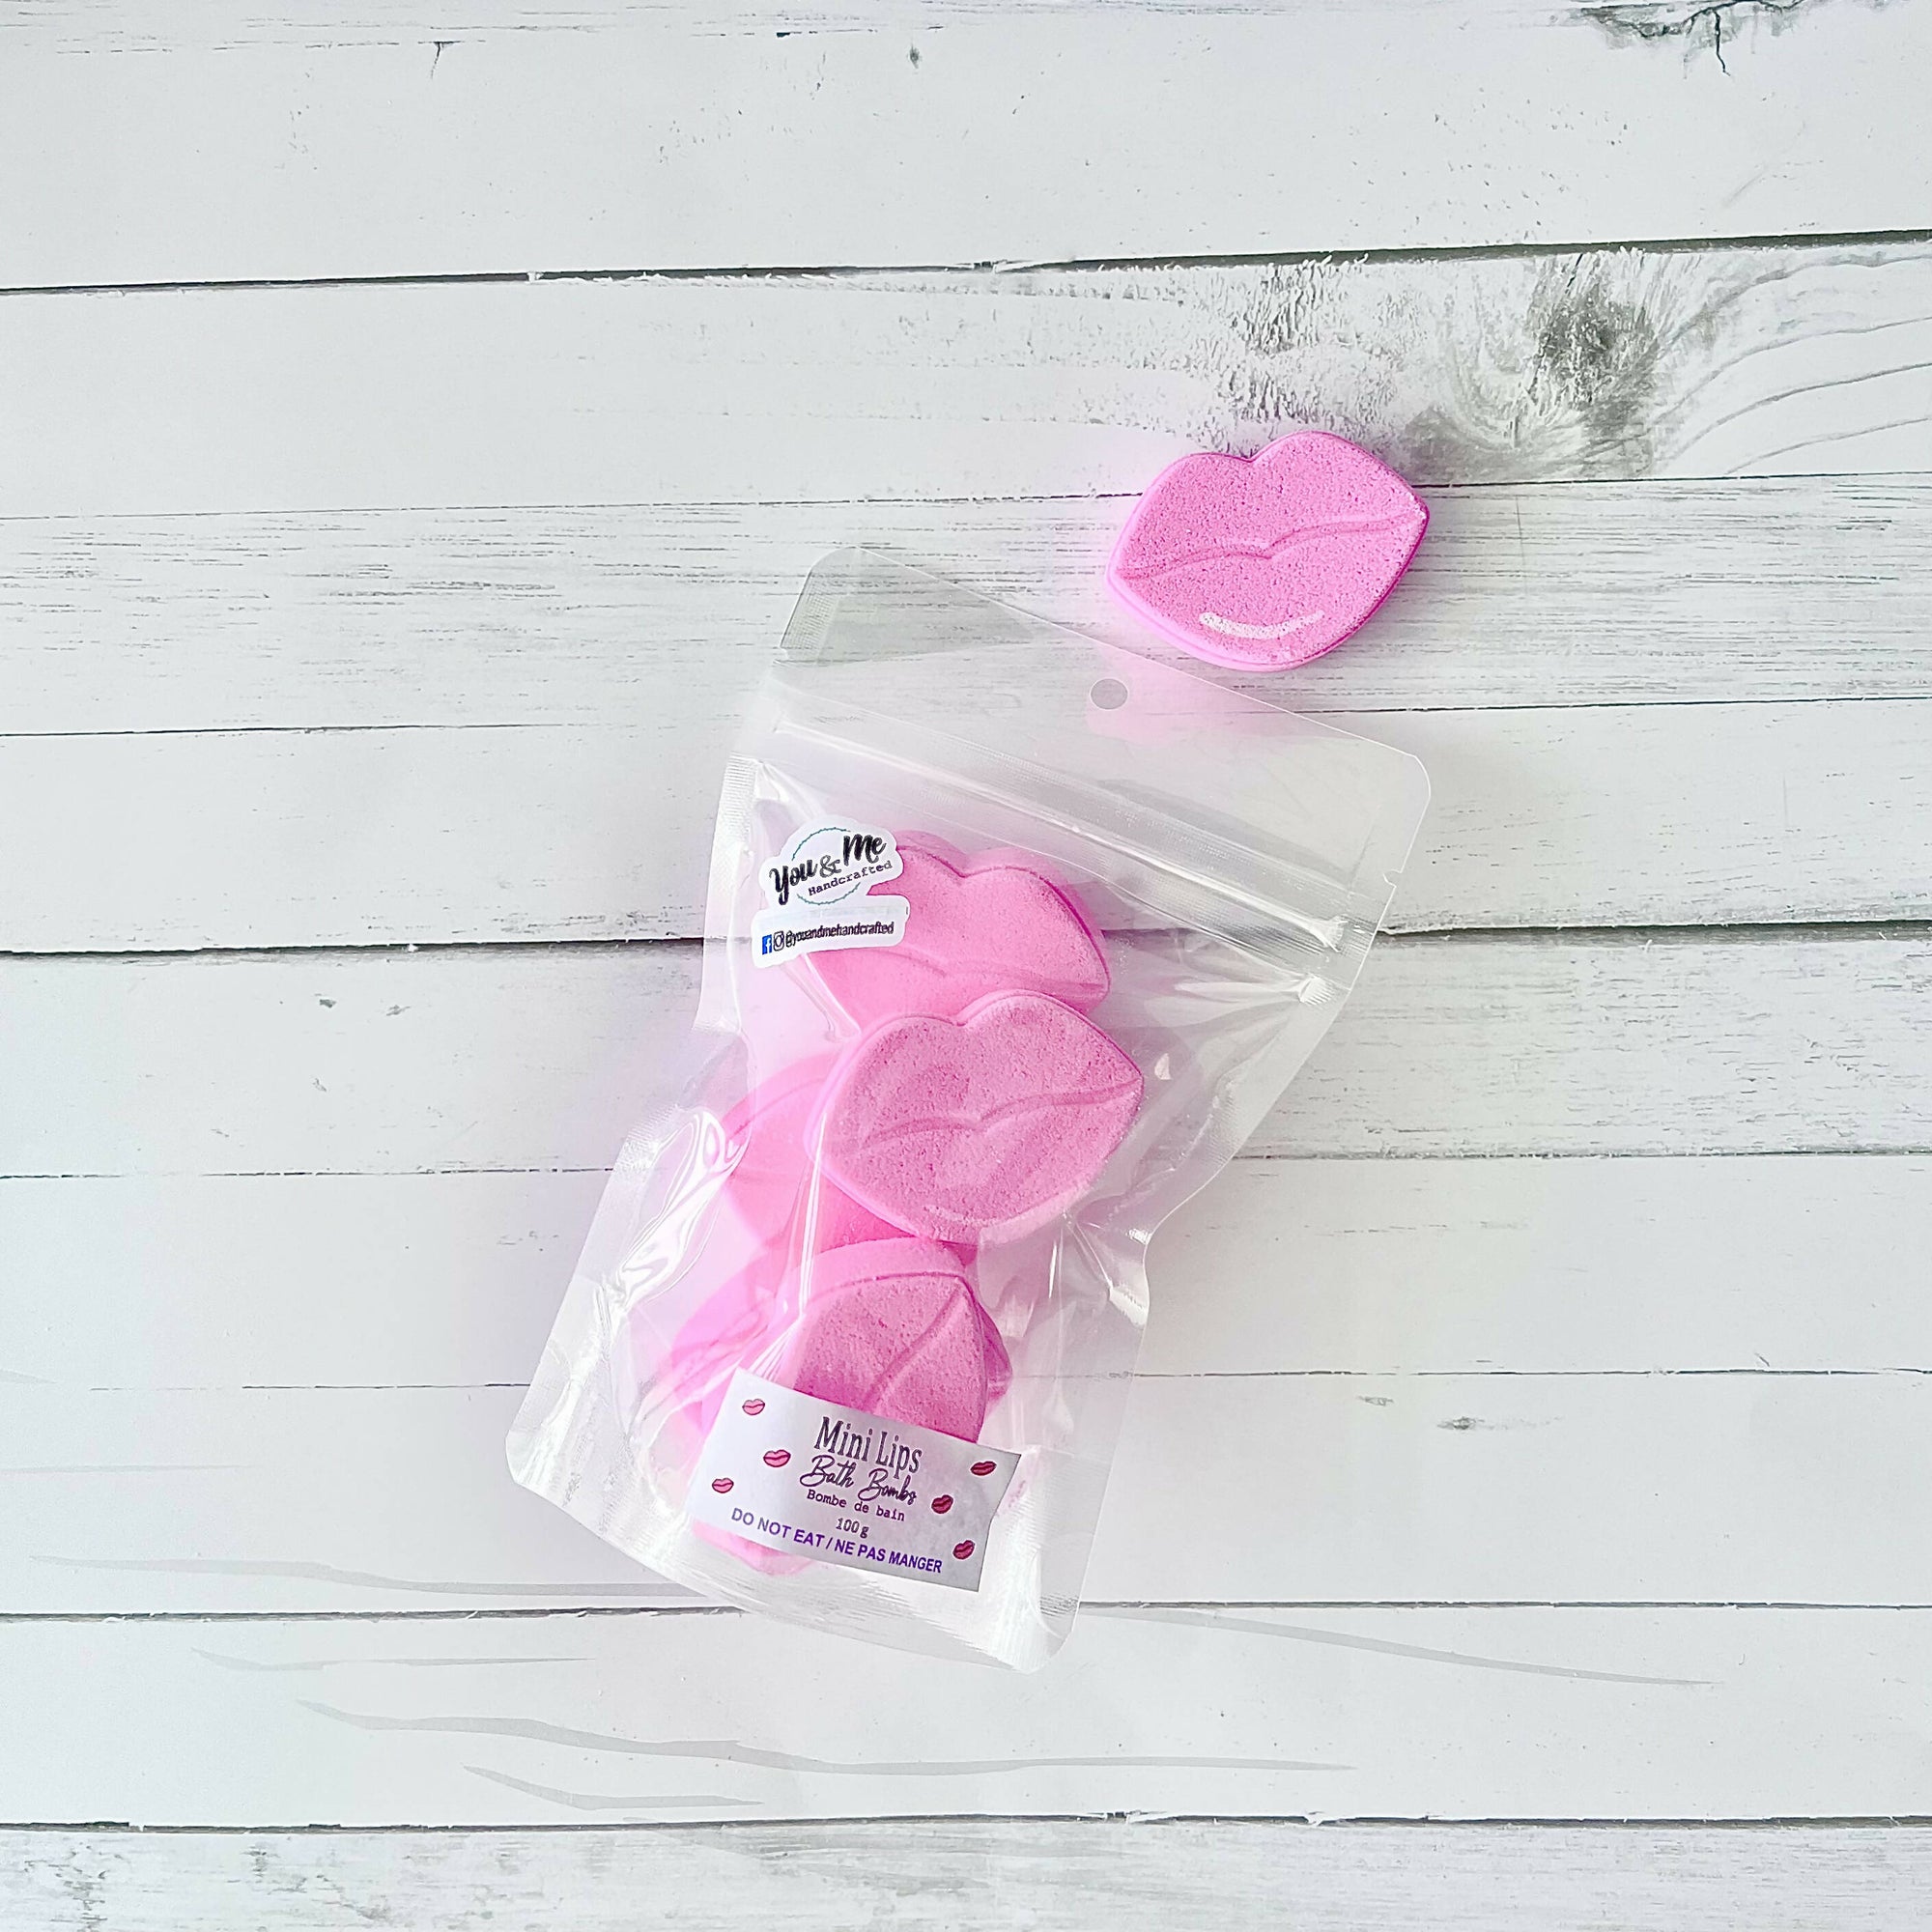 You and Me Handcrafted | Mini Lips Bath Bombs